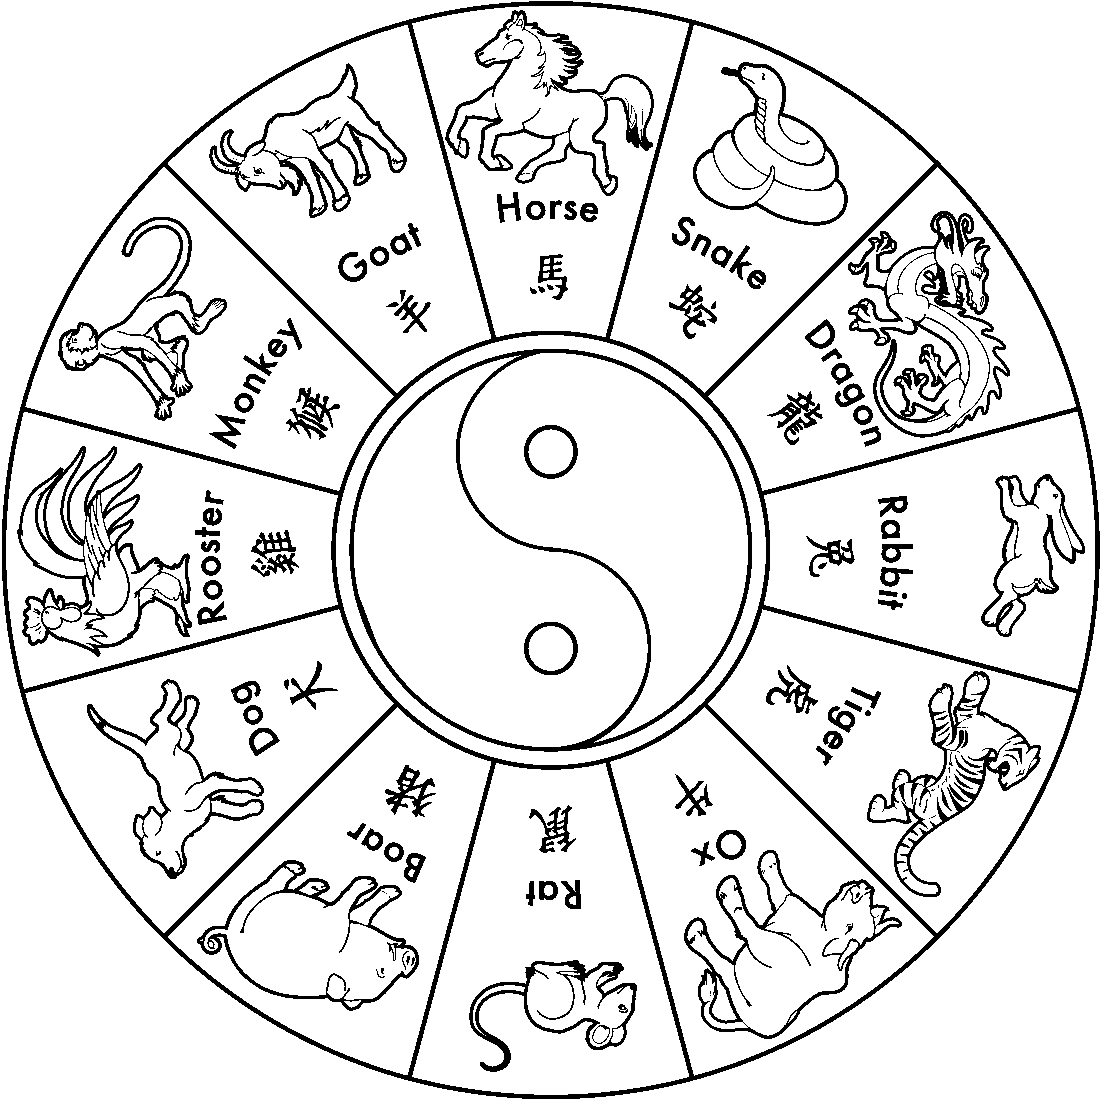 Free Chinese Zodiac Coloring Pages Download Free Chinese Zodiac